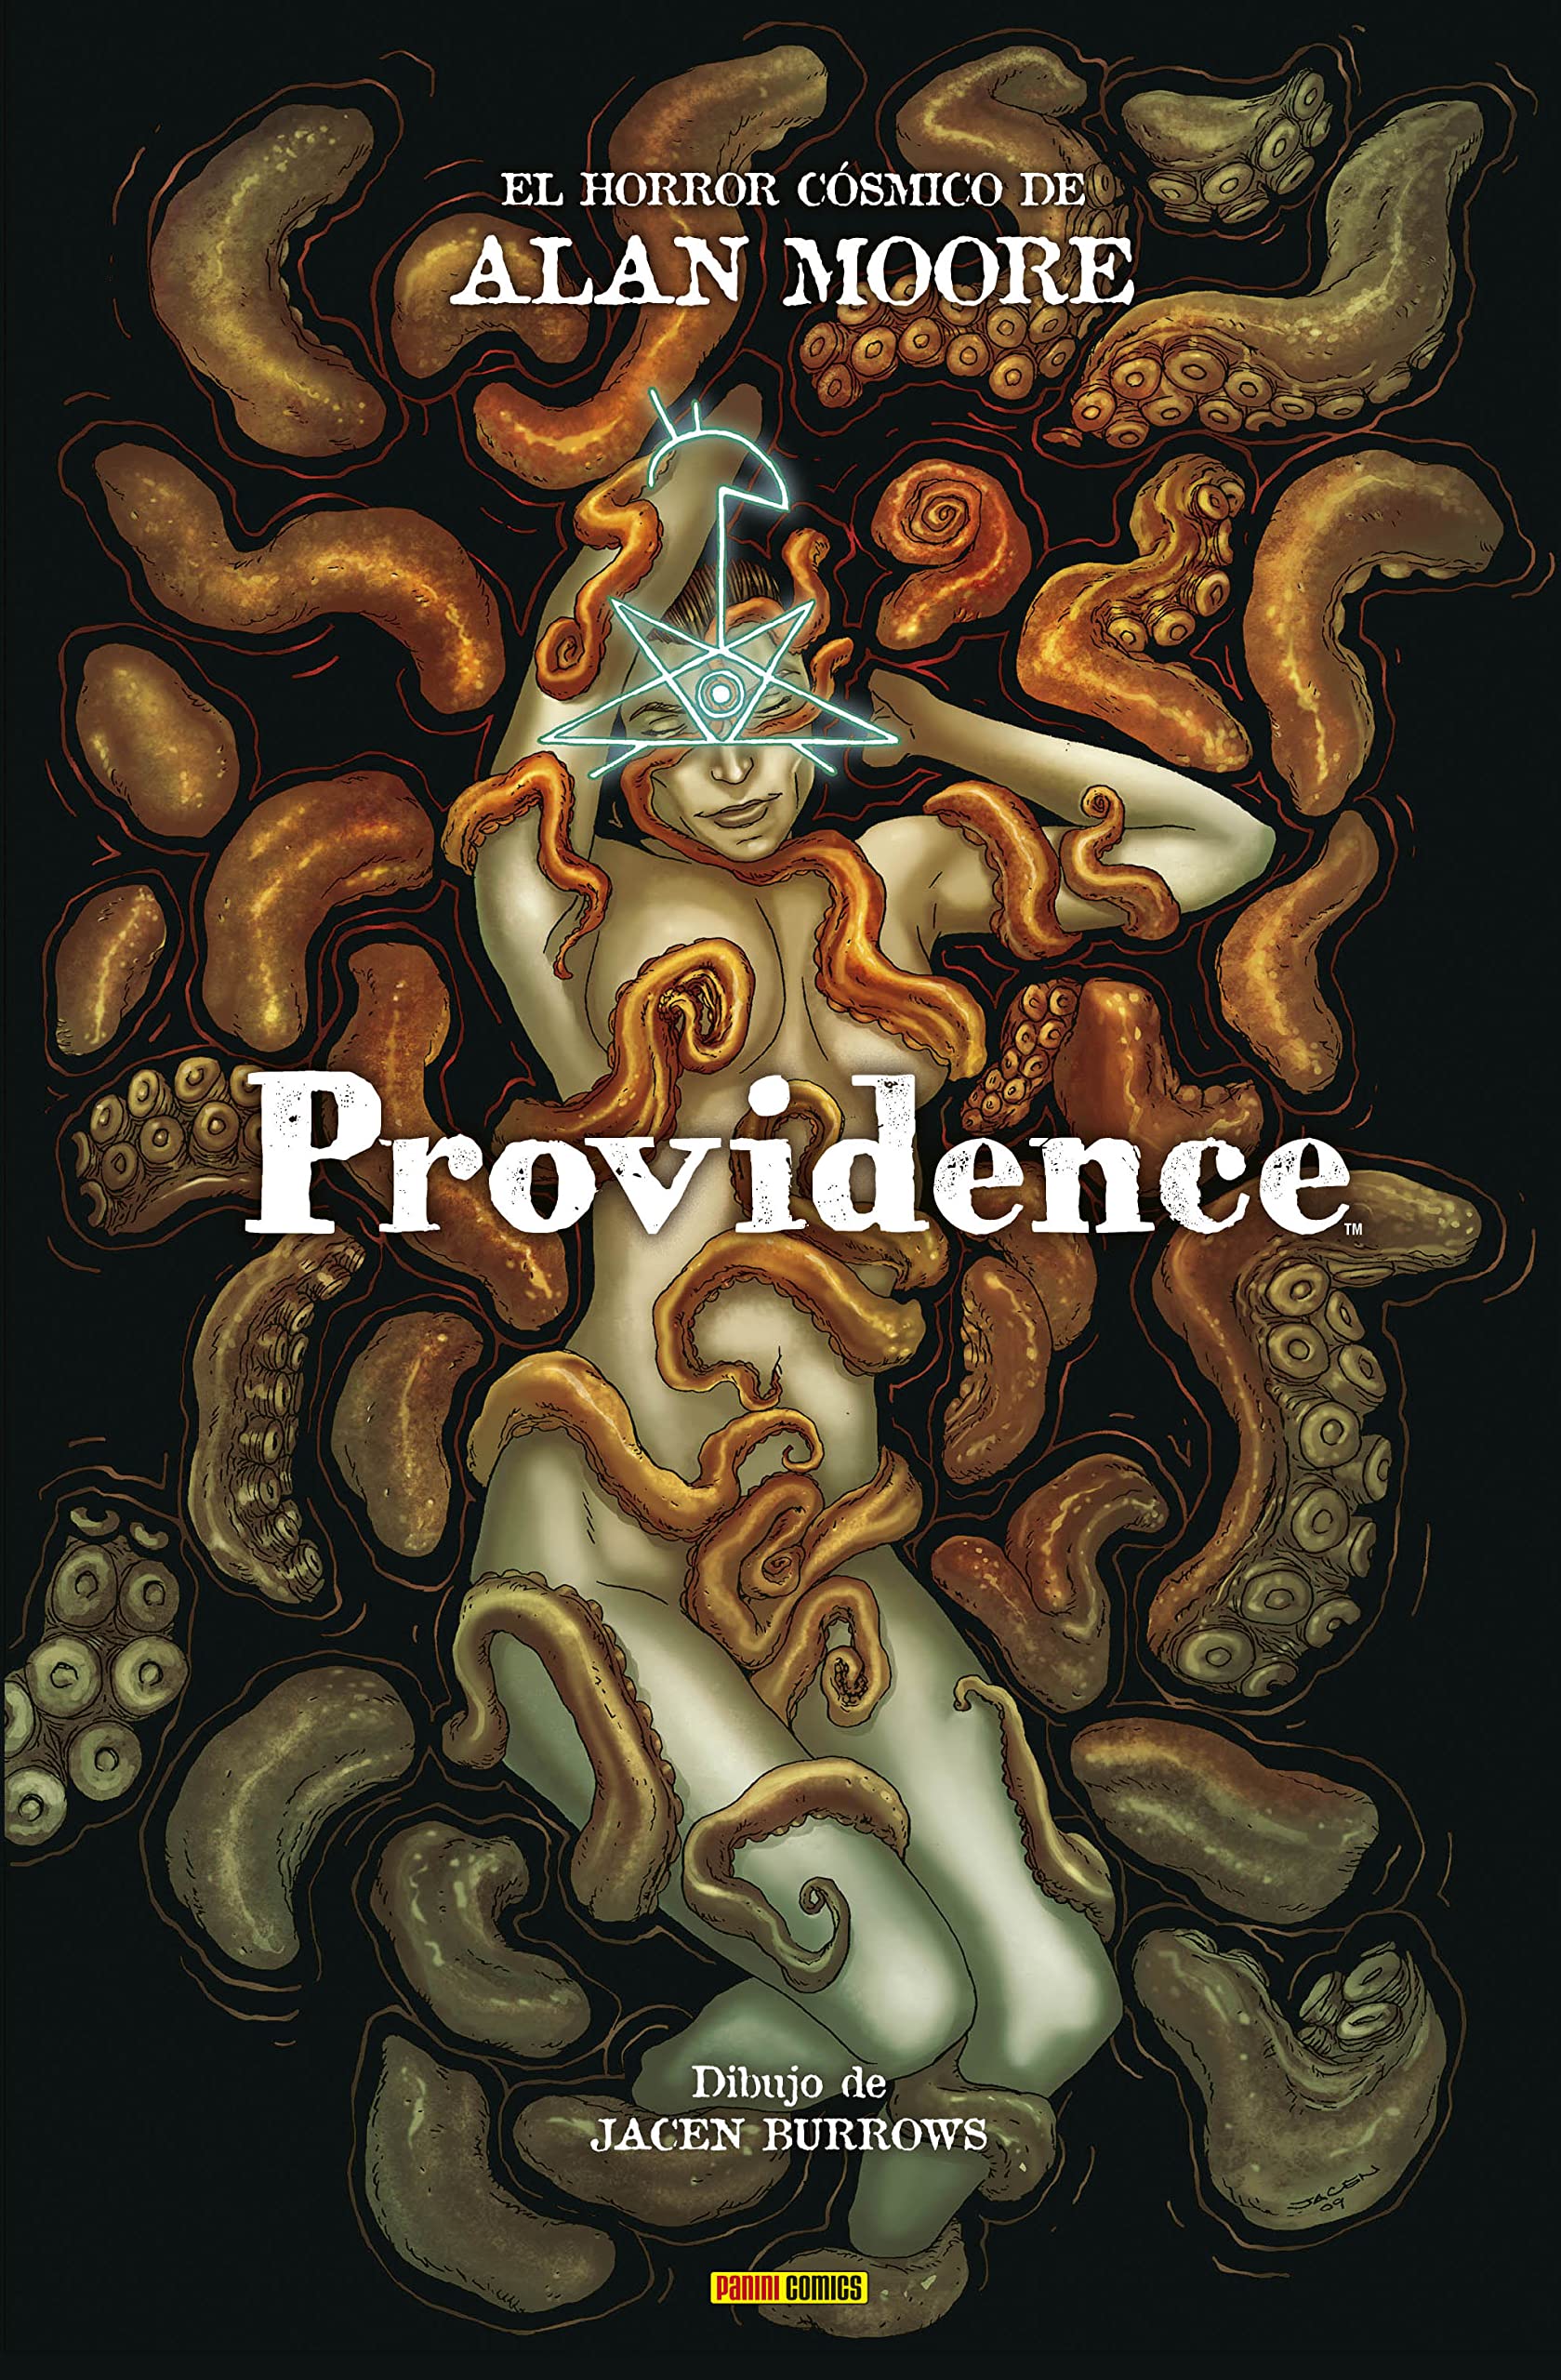 Alan Moore: Providence Compendium by Alan Moore and Jacen Burrows Hardcover (Hardcover, 2021, Avatar Press)